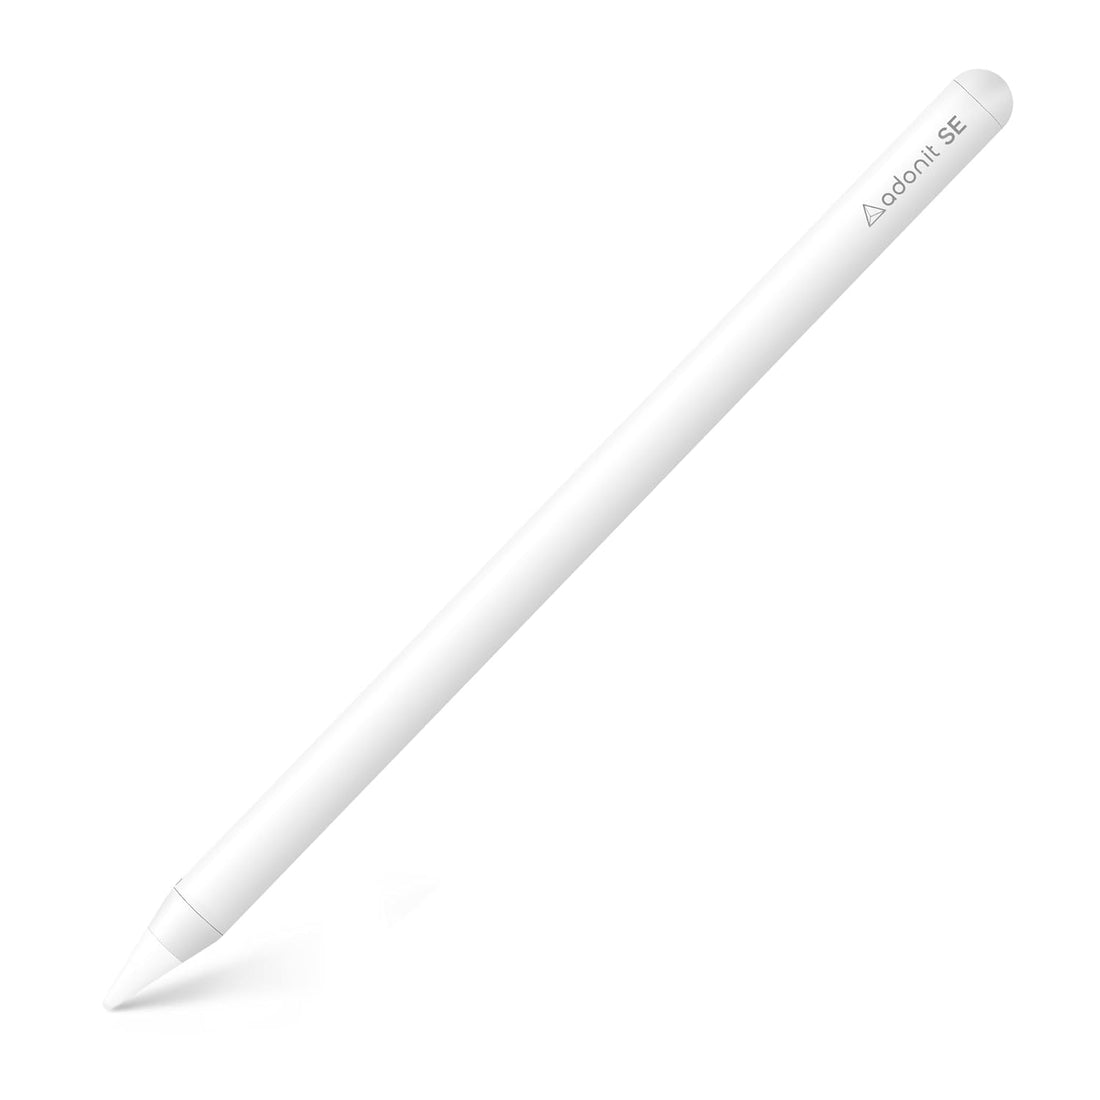 Adonit SE(White) Magnetically Attachable Palm Rejection Pencil for Writing/Drawing Stylus Compatible w iPad 6th-10th, iPad Mini 5th/6th, iPad Air 3rd-5th, iPad Pro 11" 1st-4th, iPad Pro 12.9" 3rd-6th